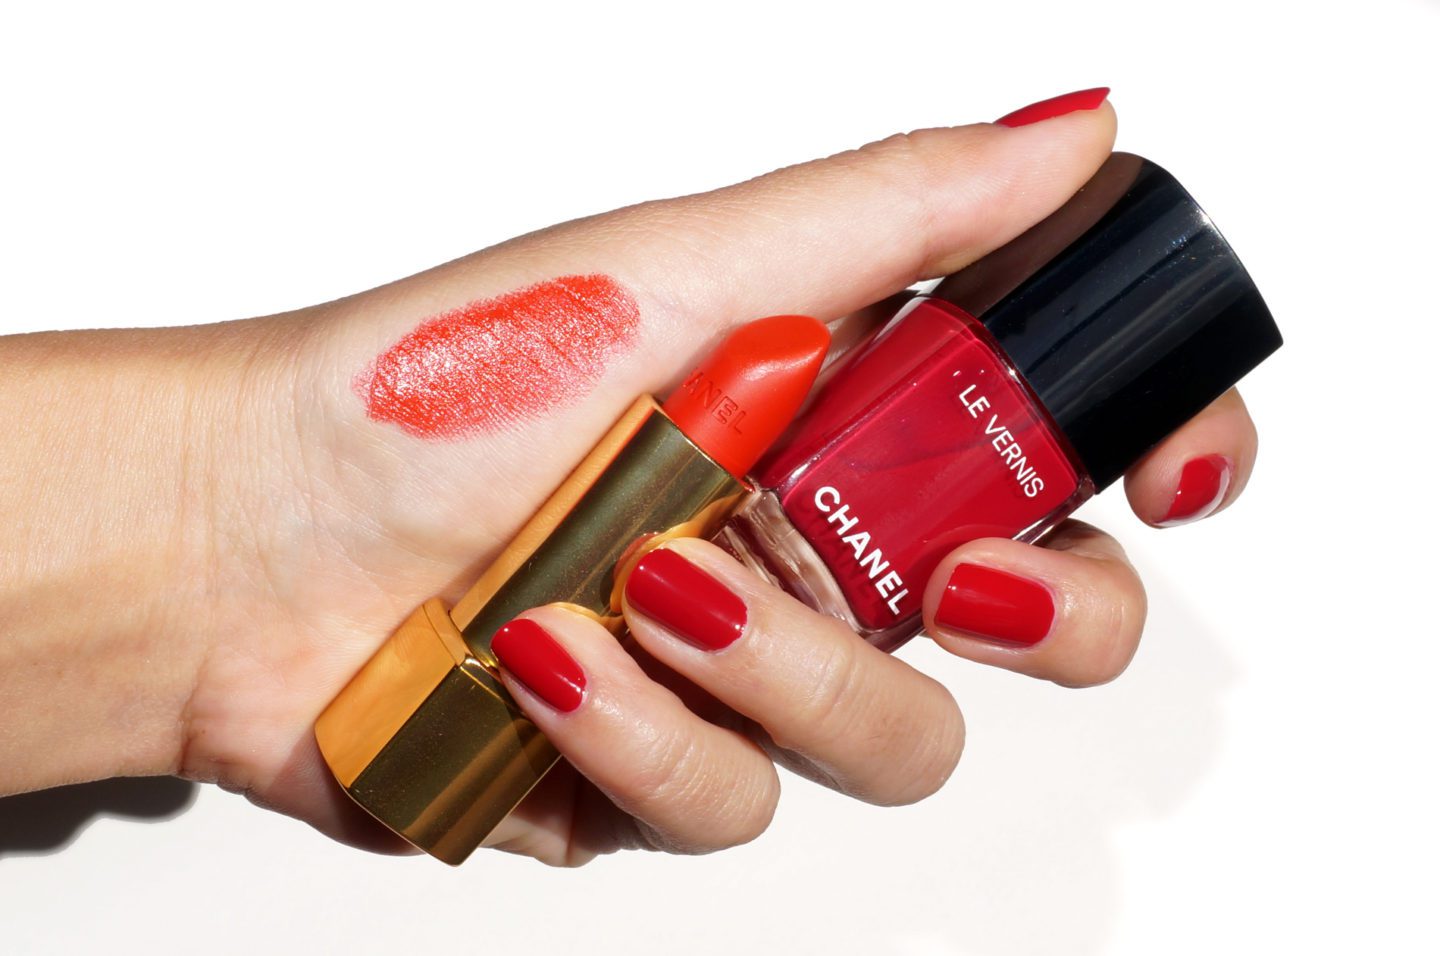 Chanel Le Vernis Shantung and Rouge Allure Velvet Rouge Feu swatches